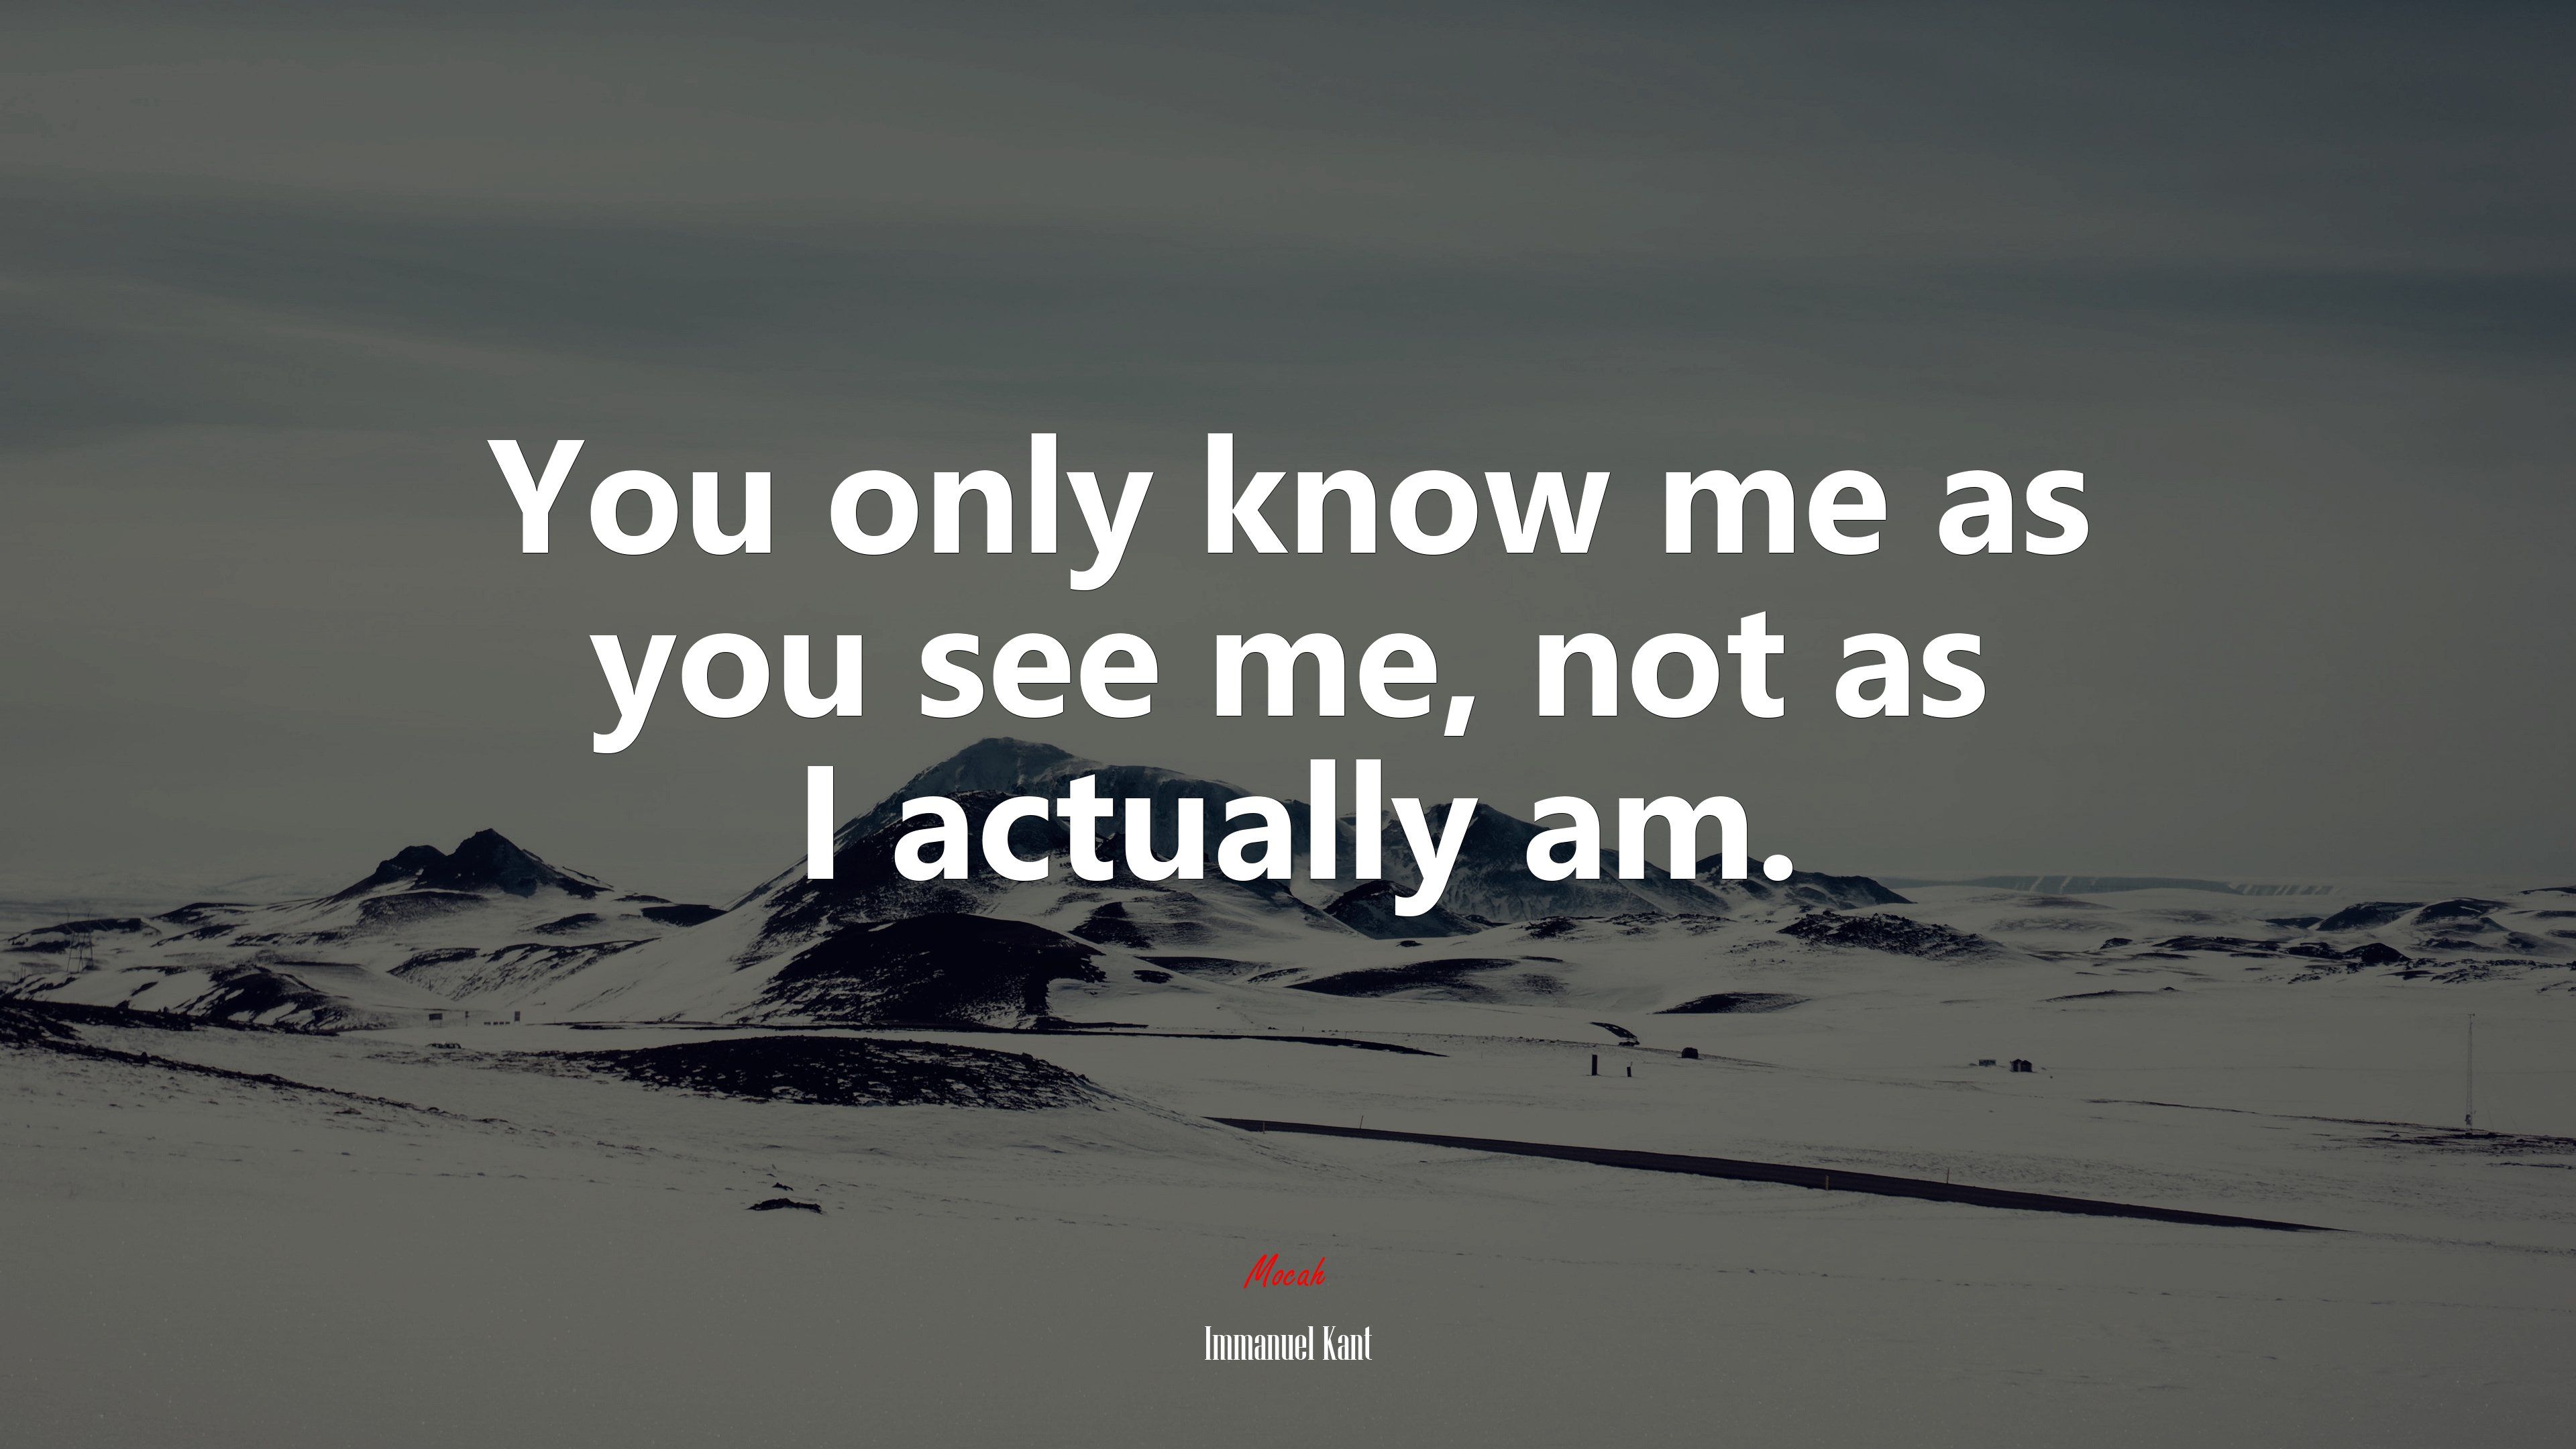 You only know me as you see me, not as I actually am. Immanuel Kant quote, 4k wallpaper. Mocah.org HD Desktop Wallpaper